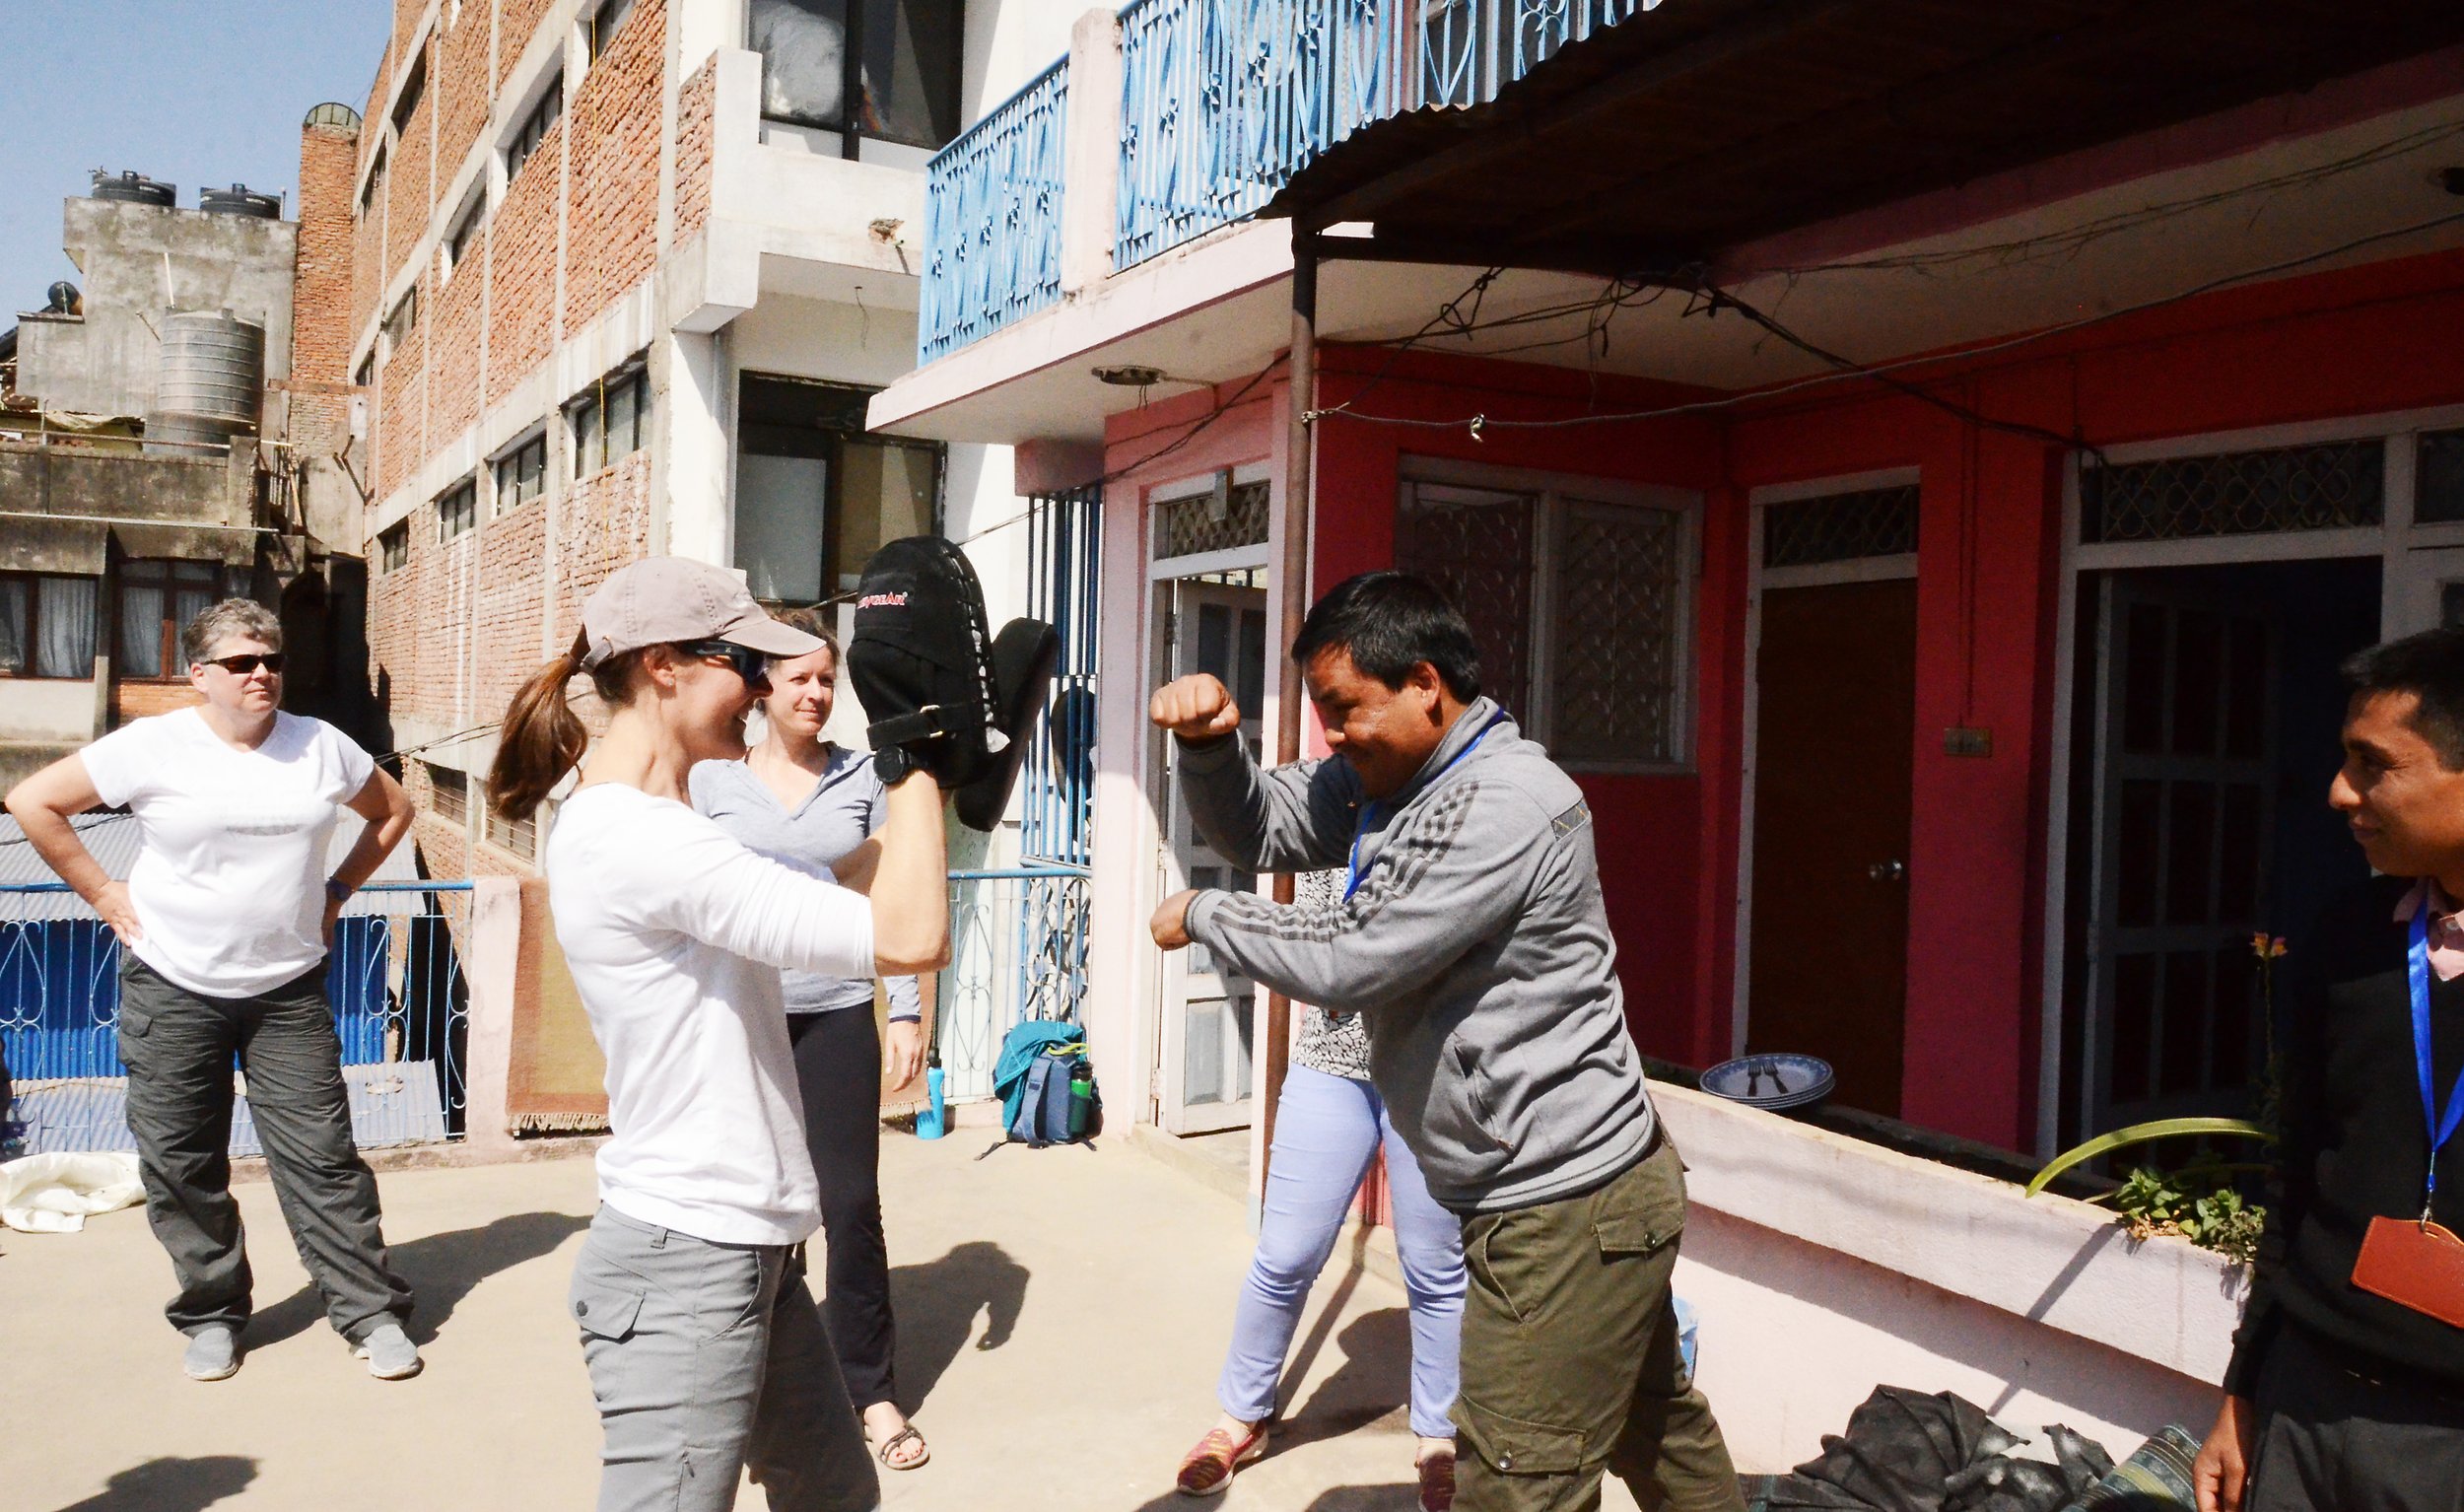 Practicing punches in rural Nepal